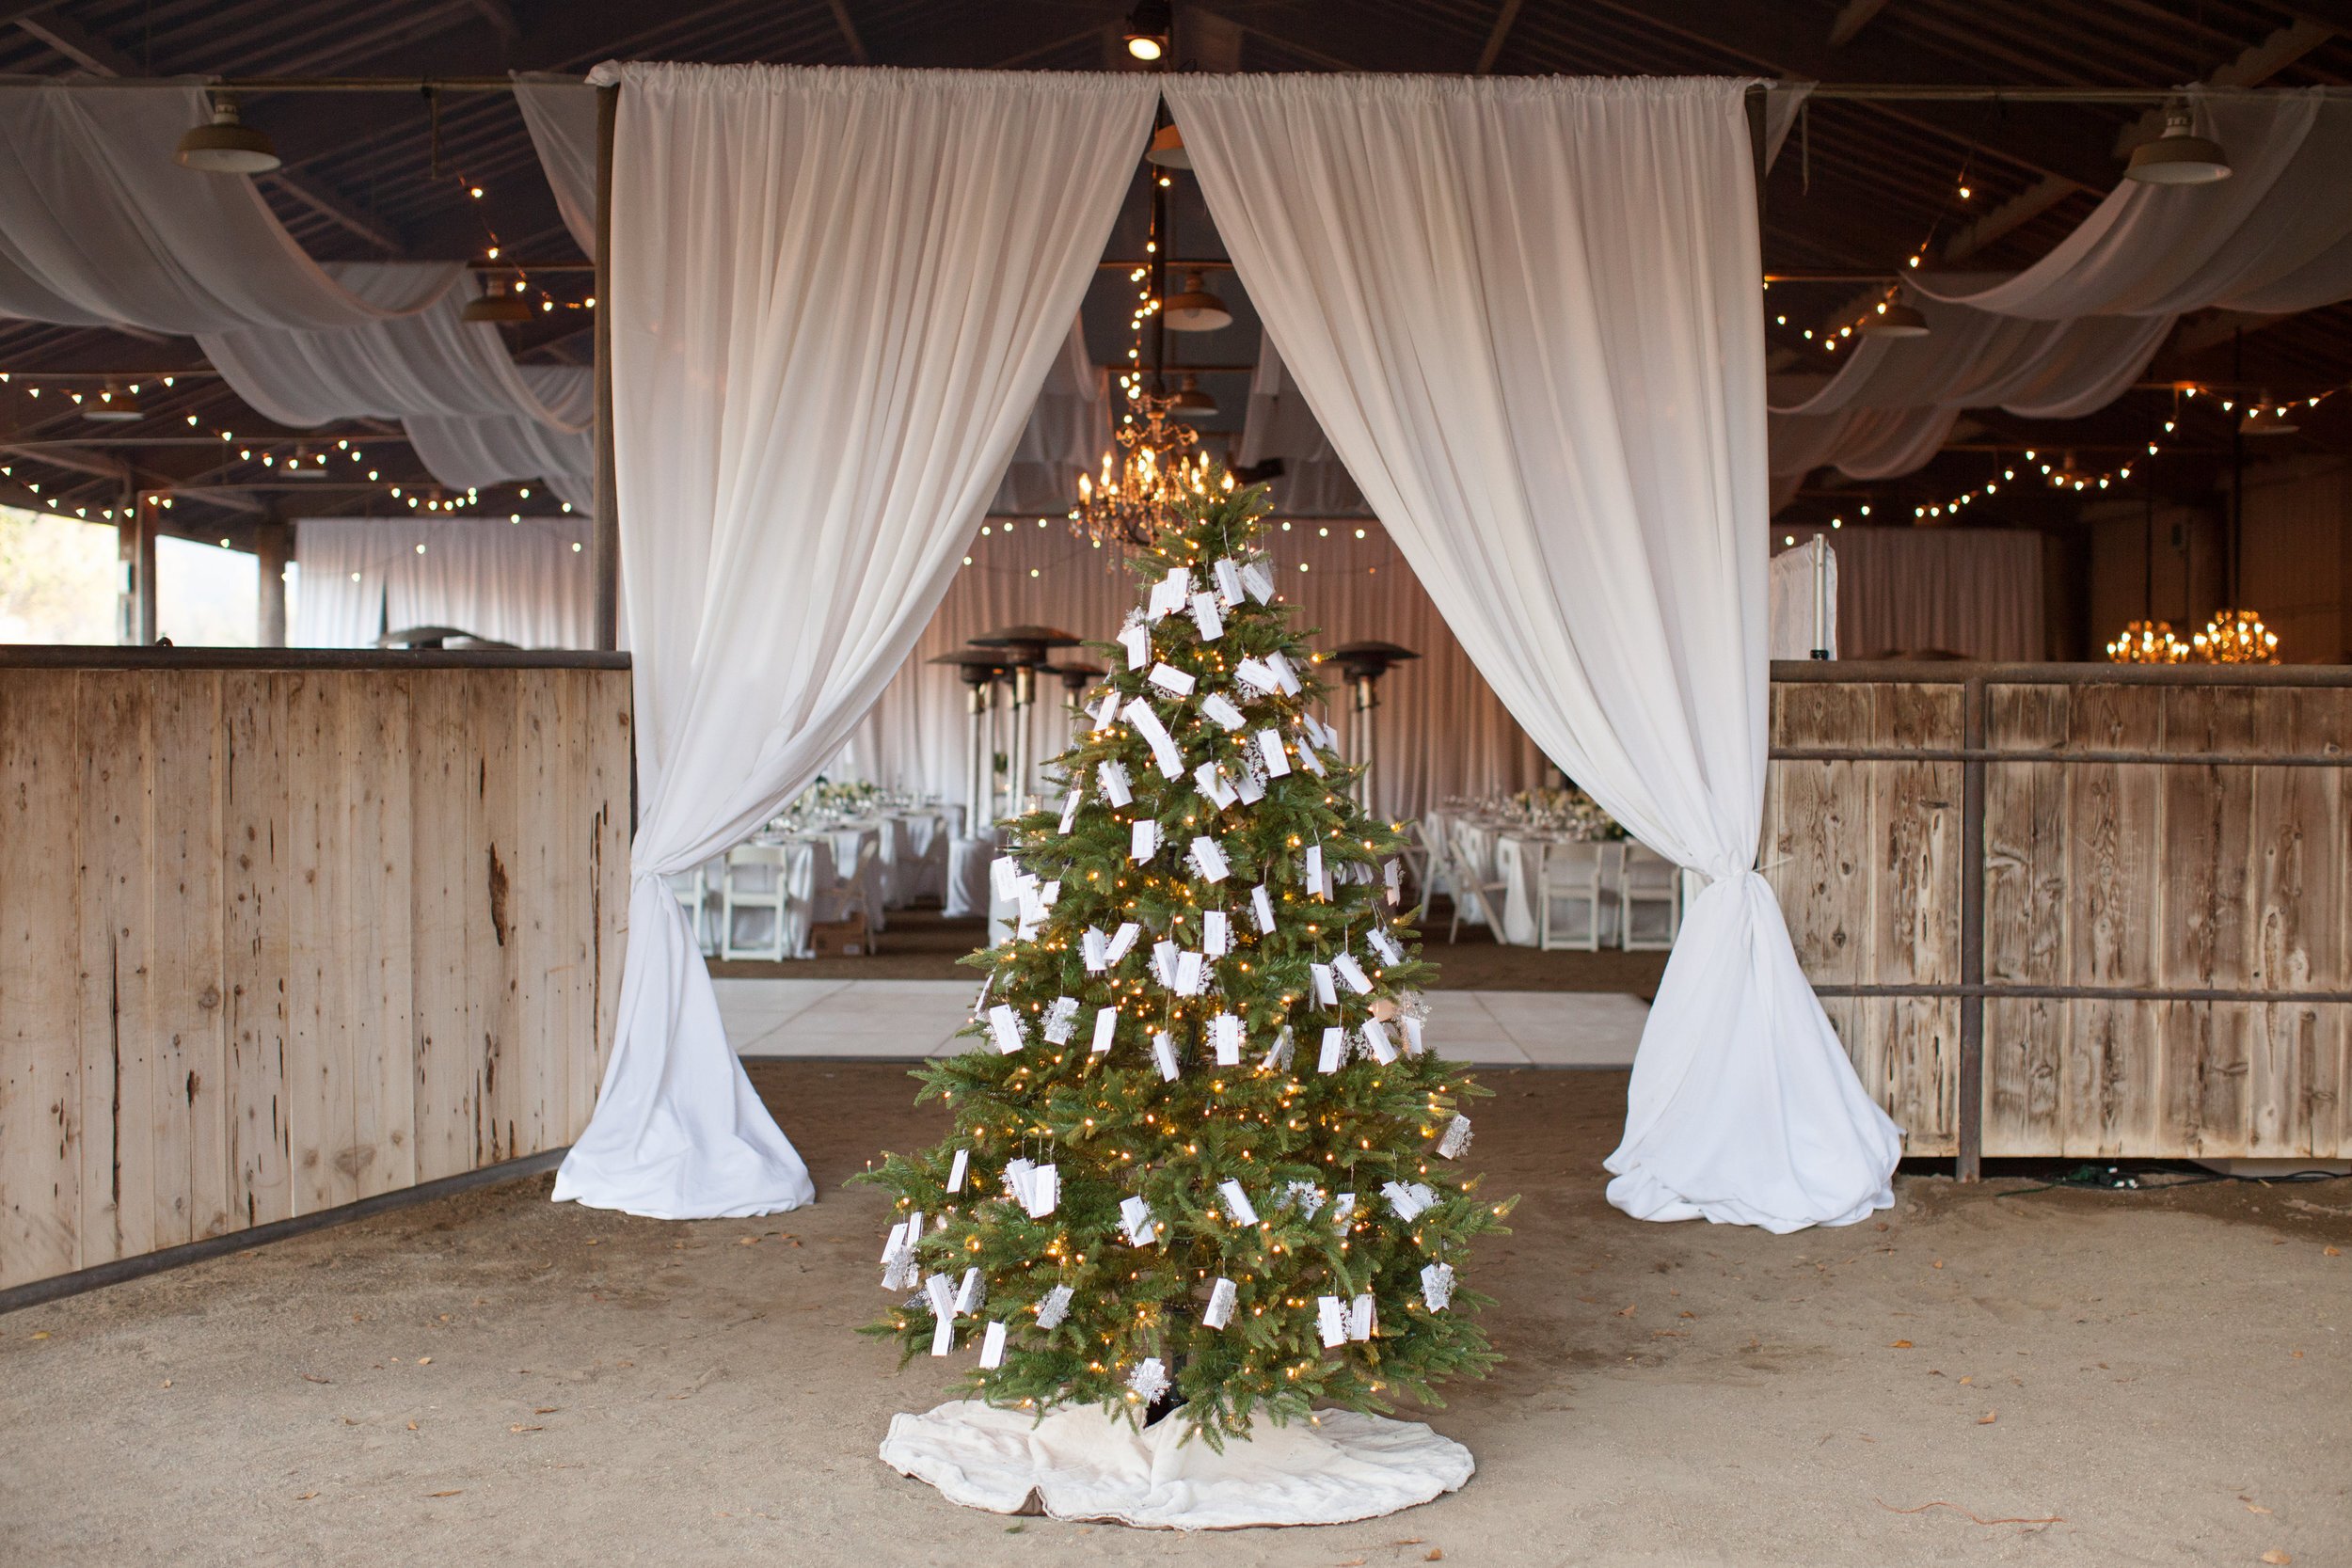 www.santabarbarawedding.com | Whispering Rose Ranch | Ann Johnson Events | Anna J Photography | Love Struck Rentals | Discount Party Rental | Decorated Christmas Tree